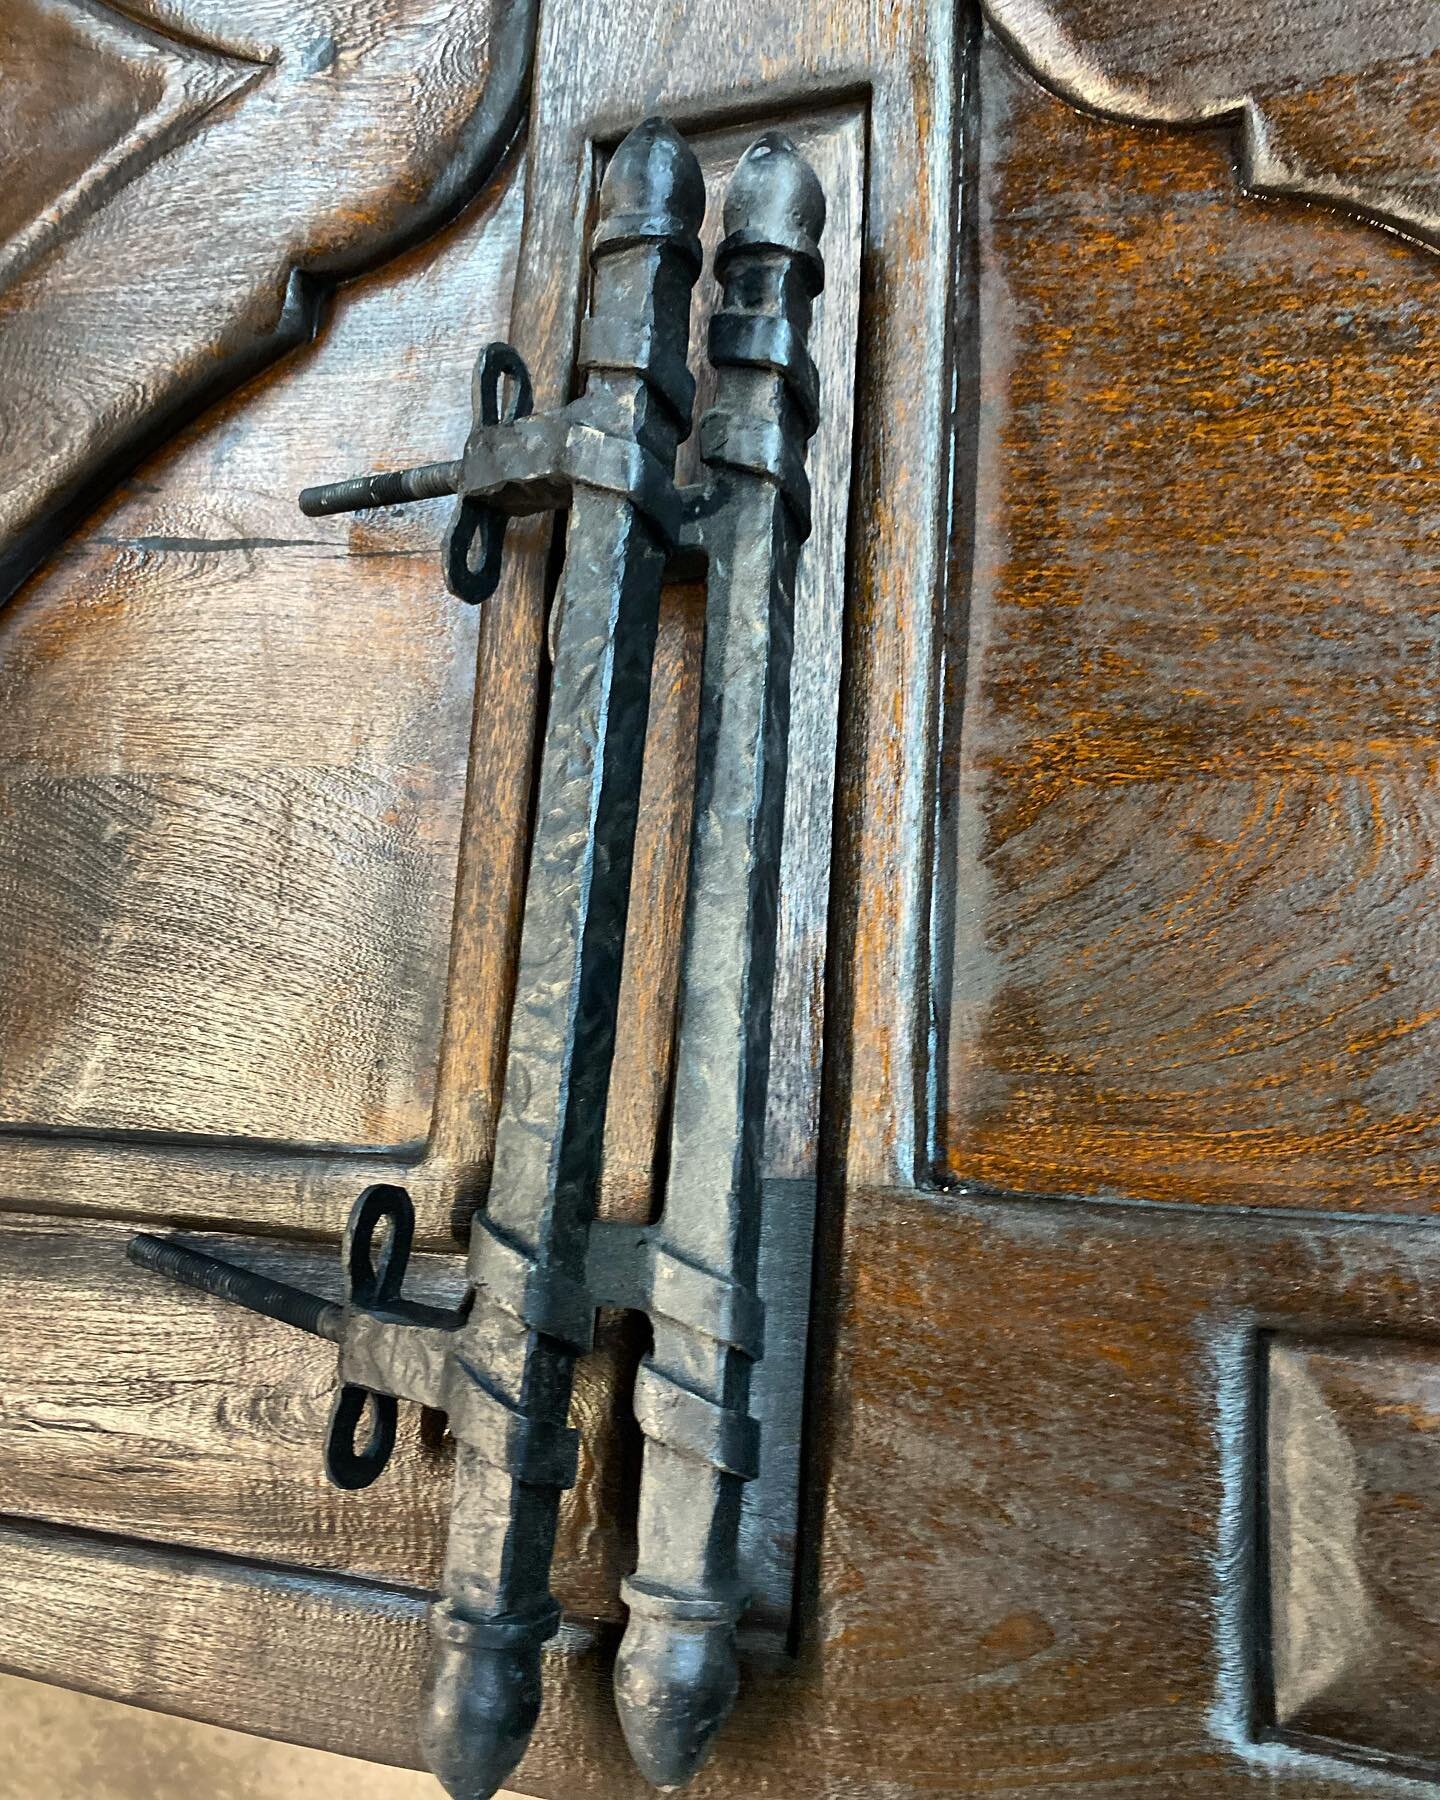 We hand forge the iron doors pulls for each of our custom doors.  #doors #forgediron #handforged #customdoors #exteriordesign #entrydoors #home